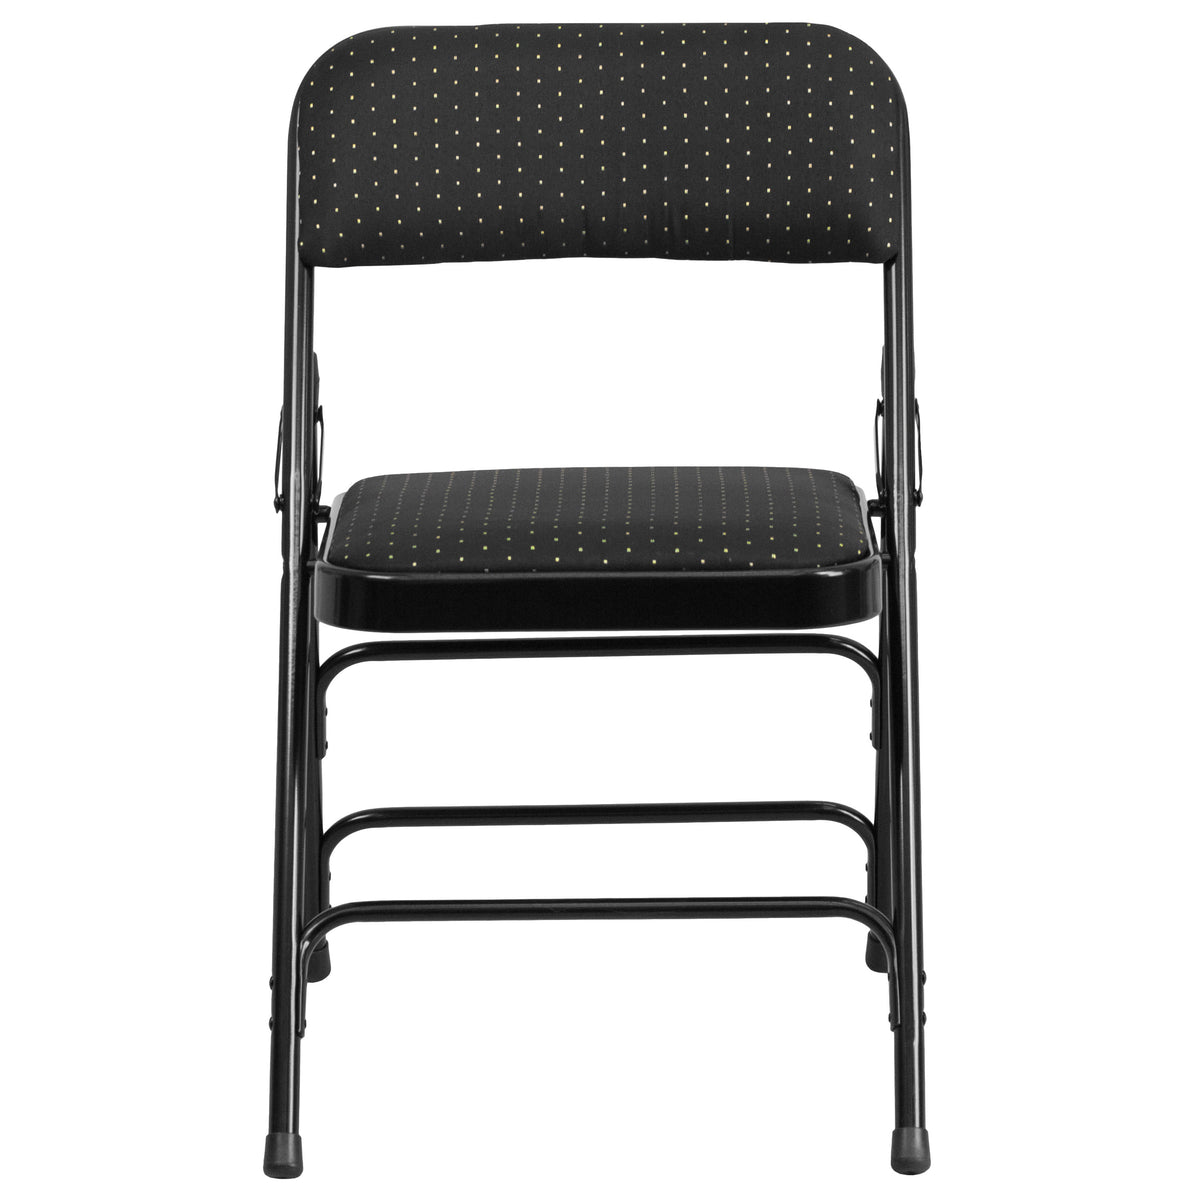 Black Patterned |#| Curved Triple Braced & Double Hinged Black Patterned Fabric Metal Folding Chair